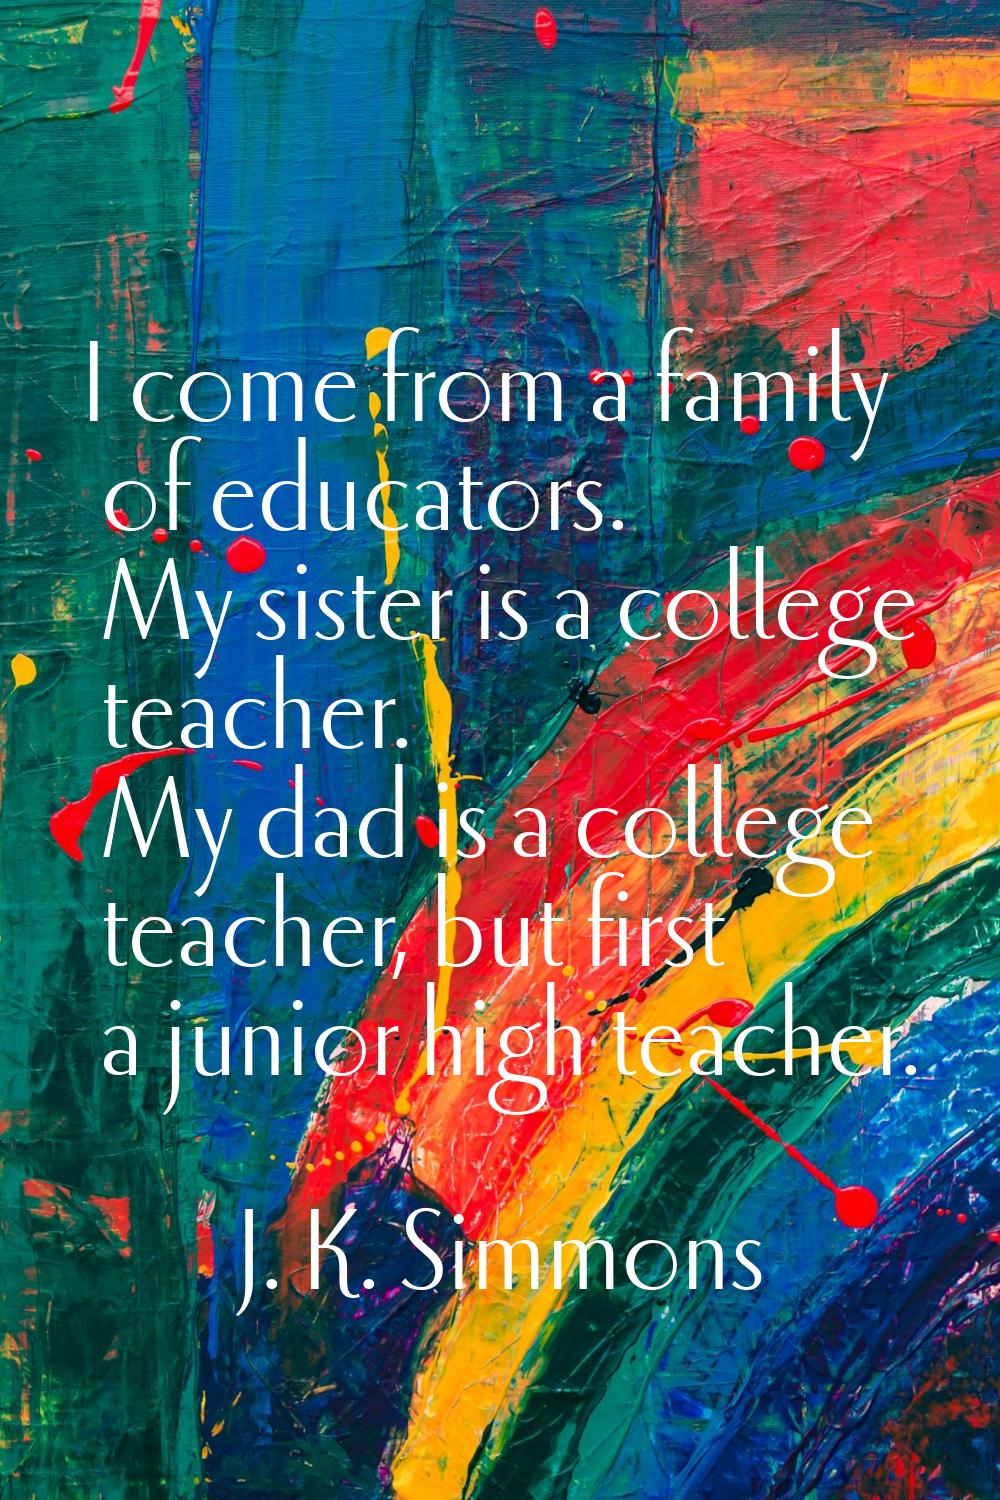 I come from a family of educators. My sister is a college teacher. My dad is a college teacher, but